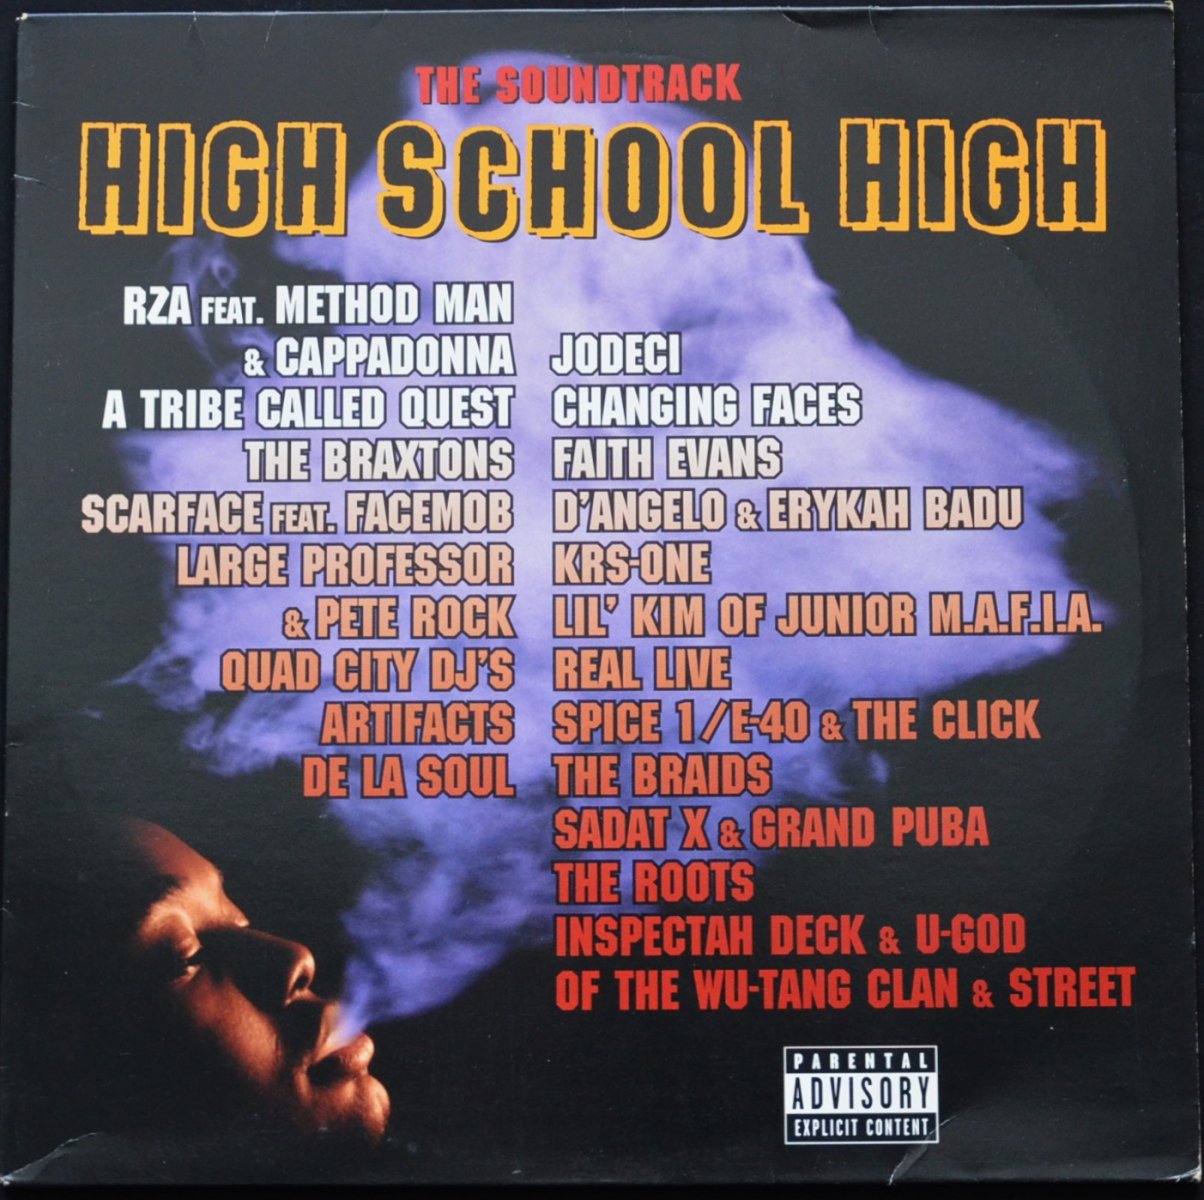 V.A. (LARGE PROFESSOR & PETE ROCK,A TRIBE CALLED QUEST...) / HIGH SCHOOL HIGH - THE SOUNDTRACK (2LP)